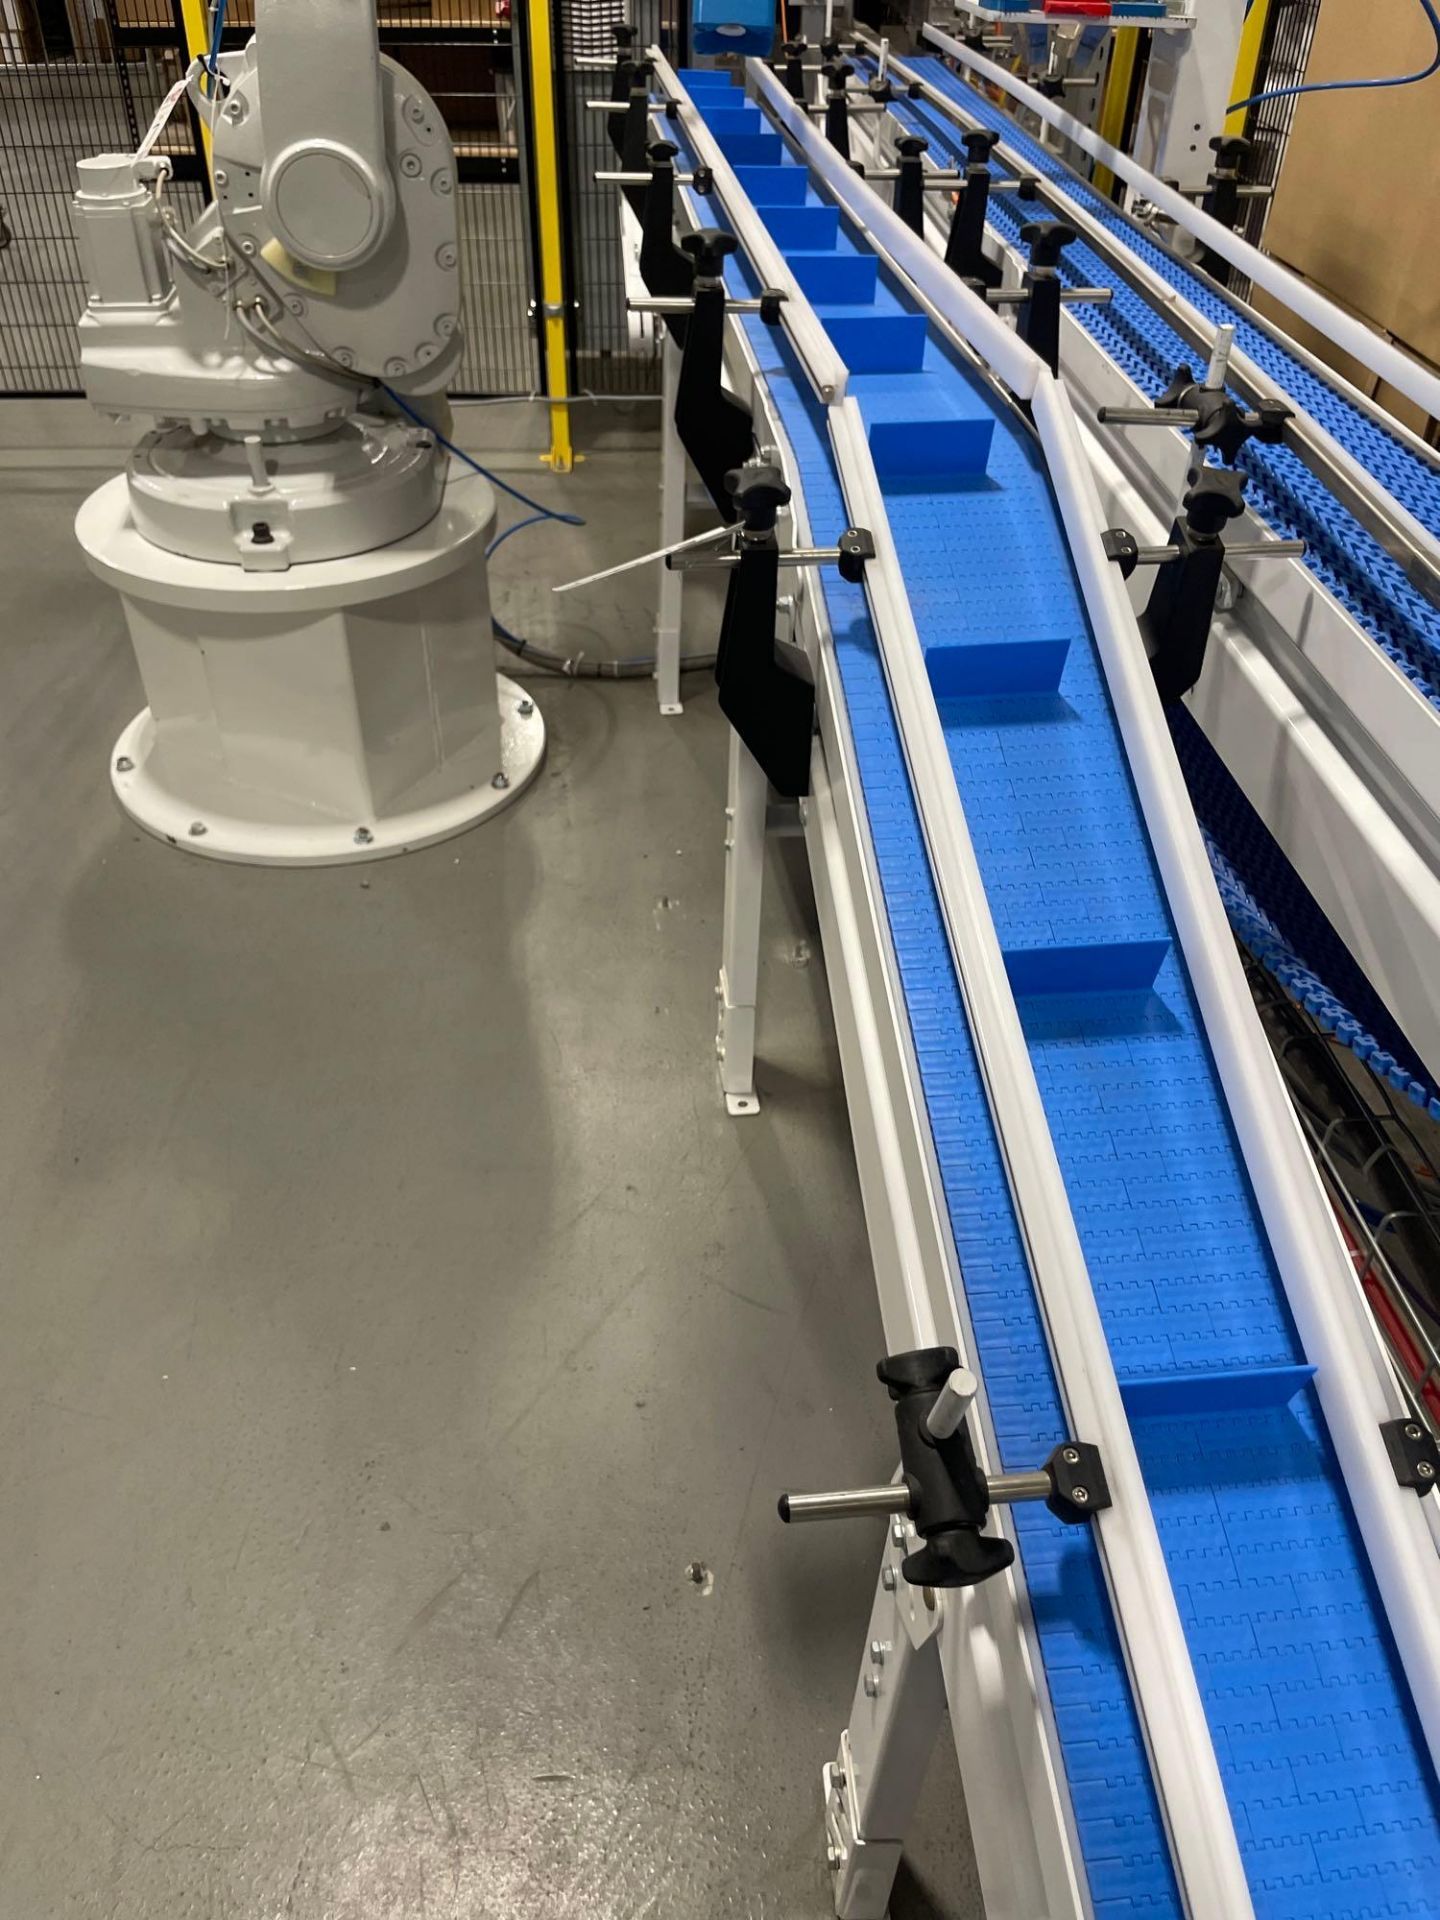 Kaitech Automation Conveyor System 9” Wide x 16 Ft Long, New 2020 - Image 5 of 5